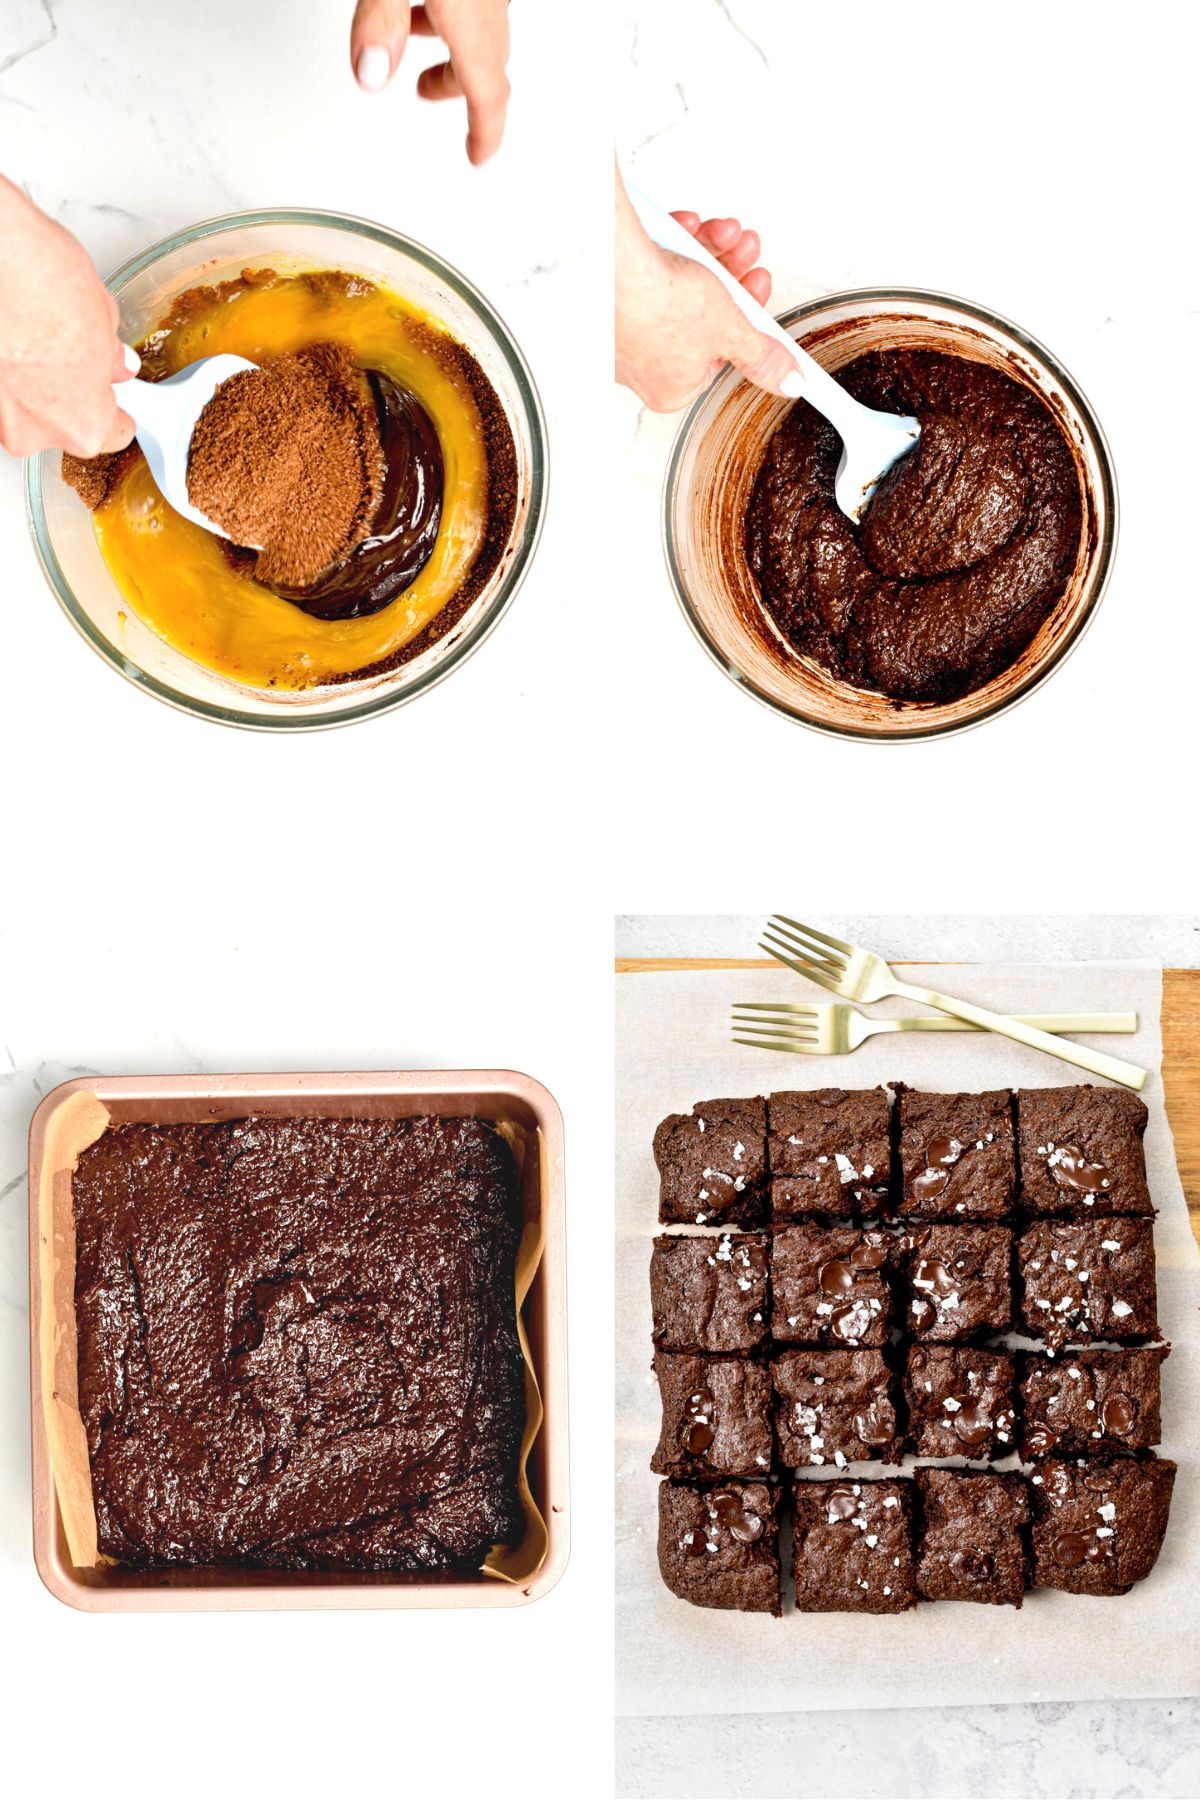 How to make Almond Flour Brownies